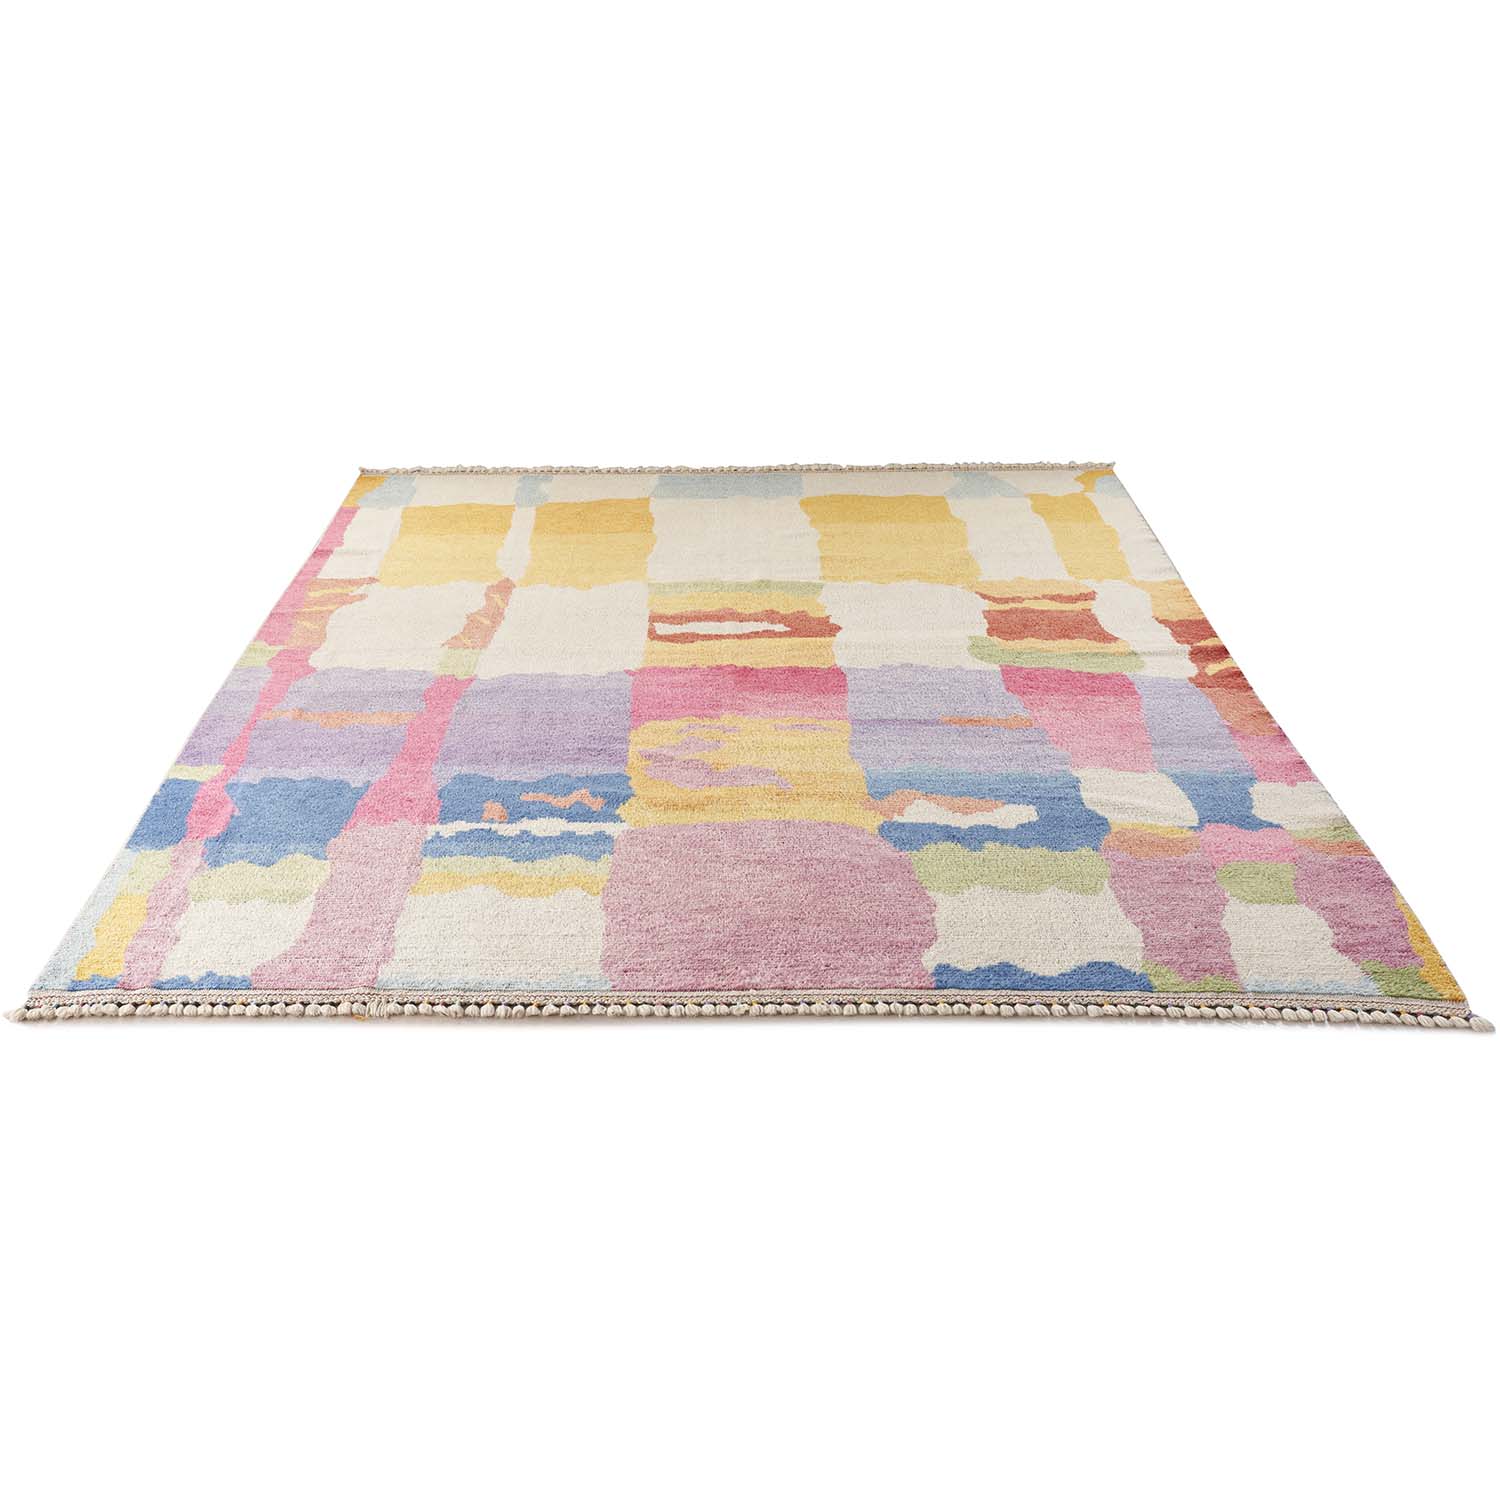 Vibrant and playful rectangular area rug with abstract patchwork design.